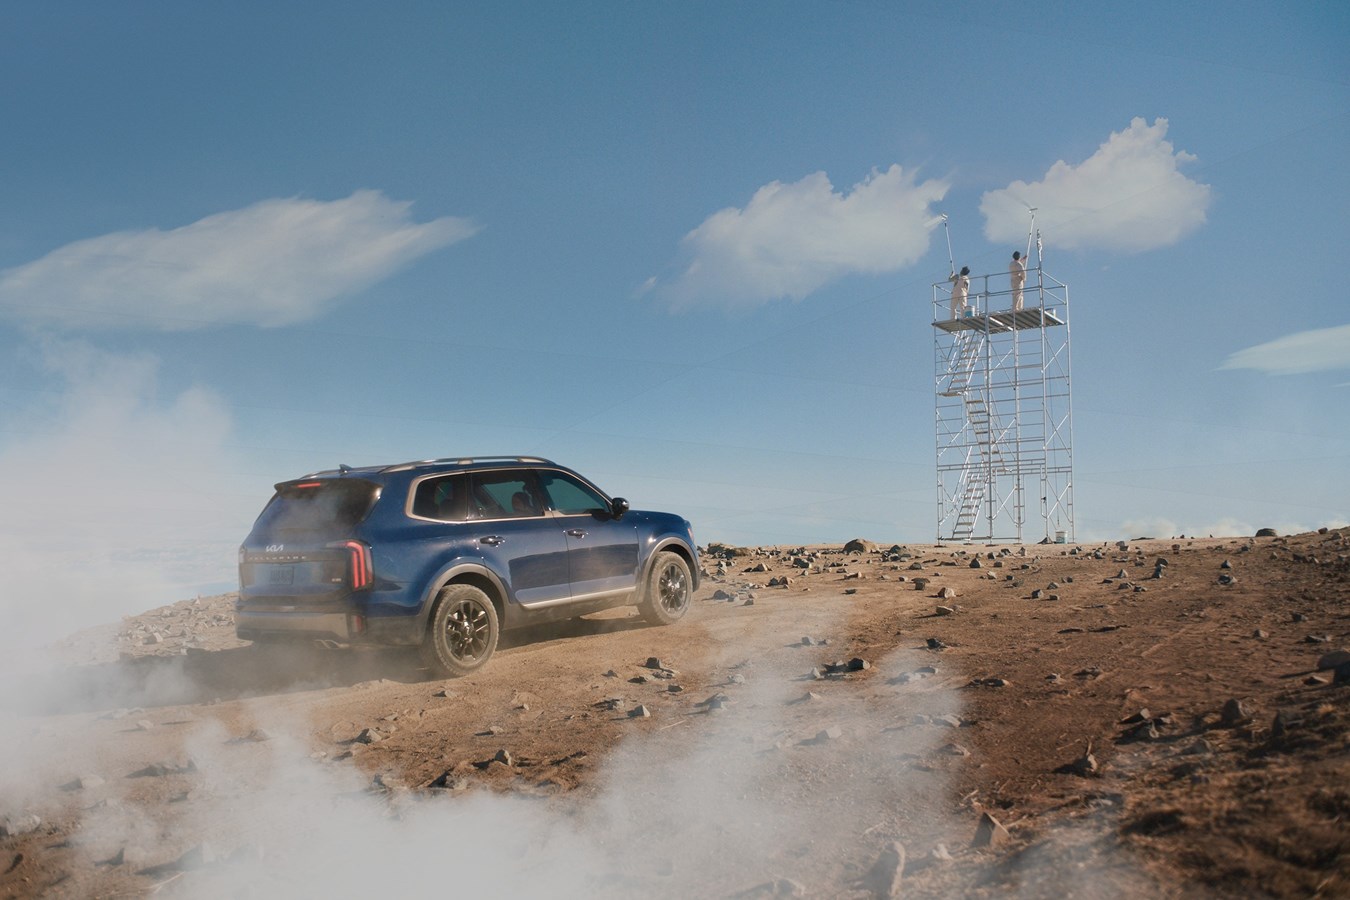 THE NEW KIA TELLURIDE X-PRO CLIMBS HIGH IN NEW CREATIVE CAMPAIGN DEBUTING DURING THE 74TH EMMY® AWARDS